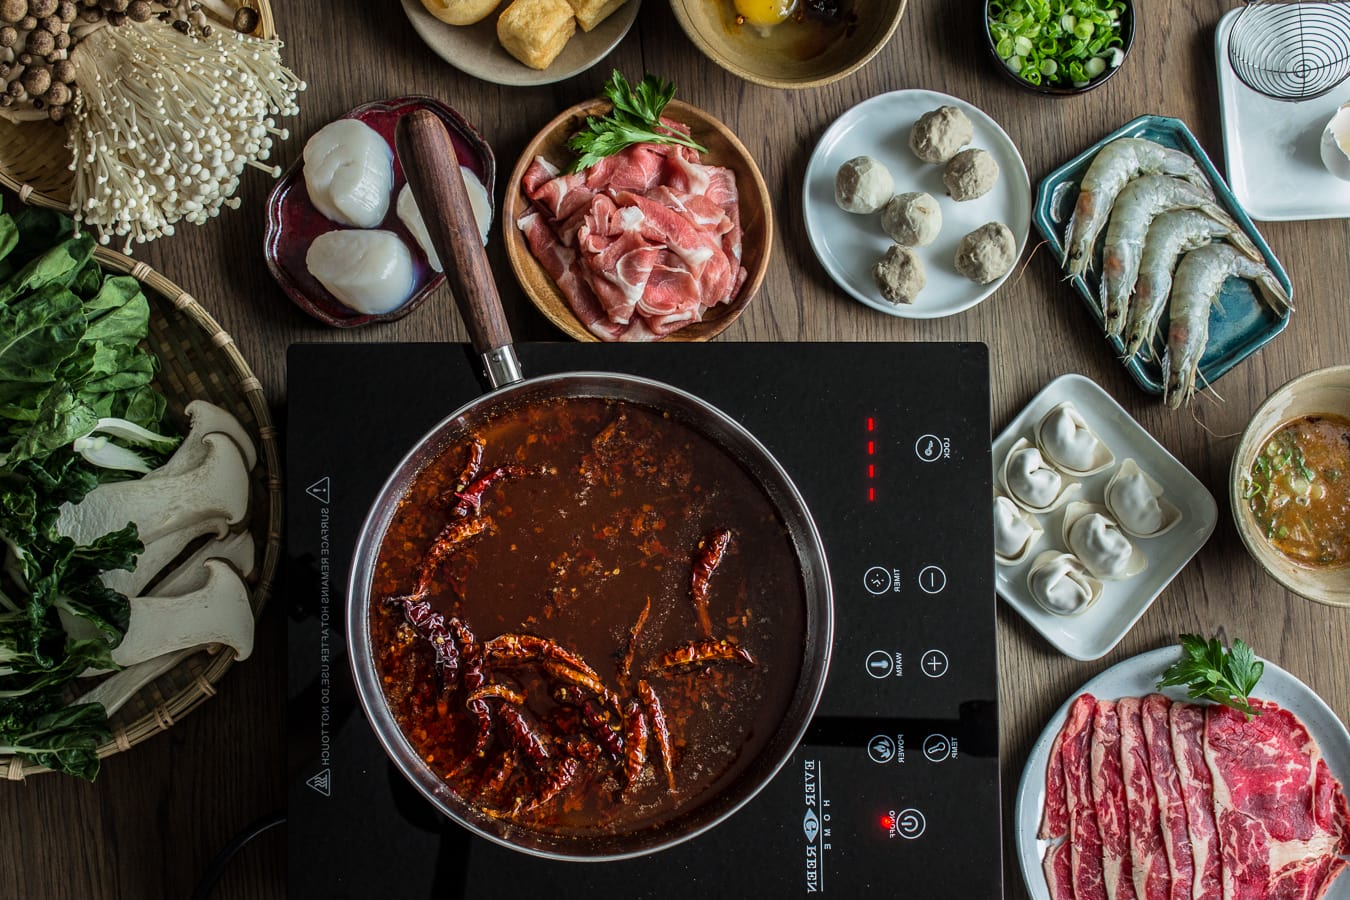 Hotpot with a chili oil broth, with Asian seafood such as scallops, shrimp around the pot.